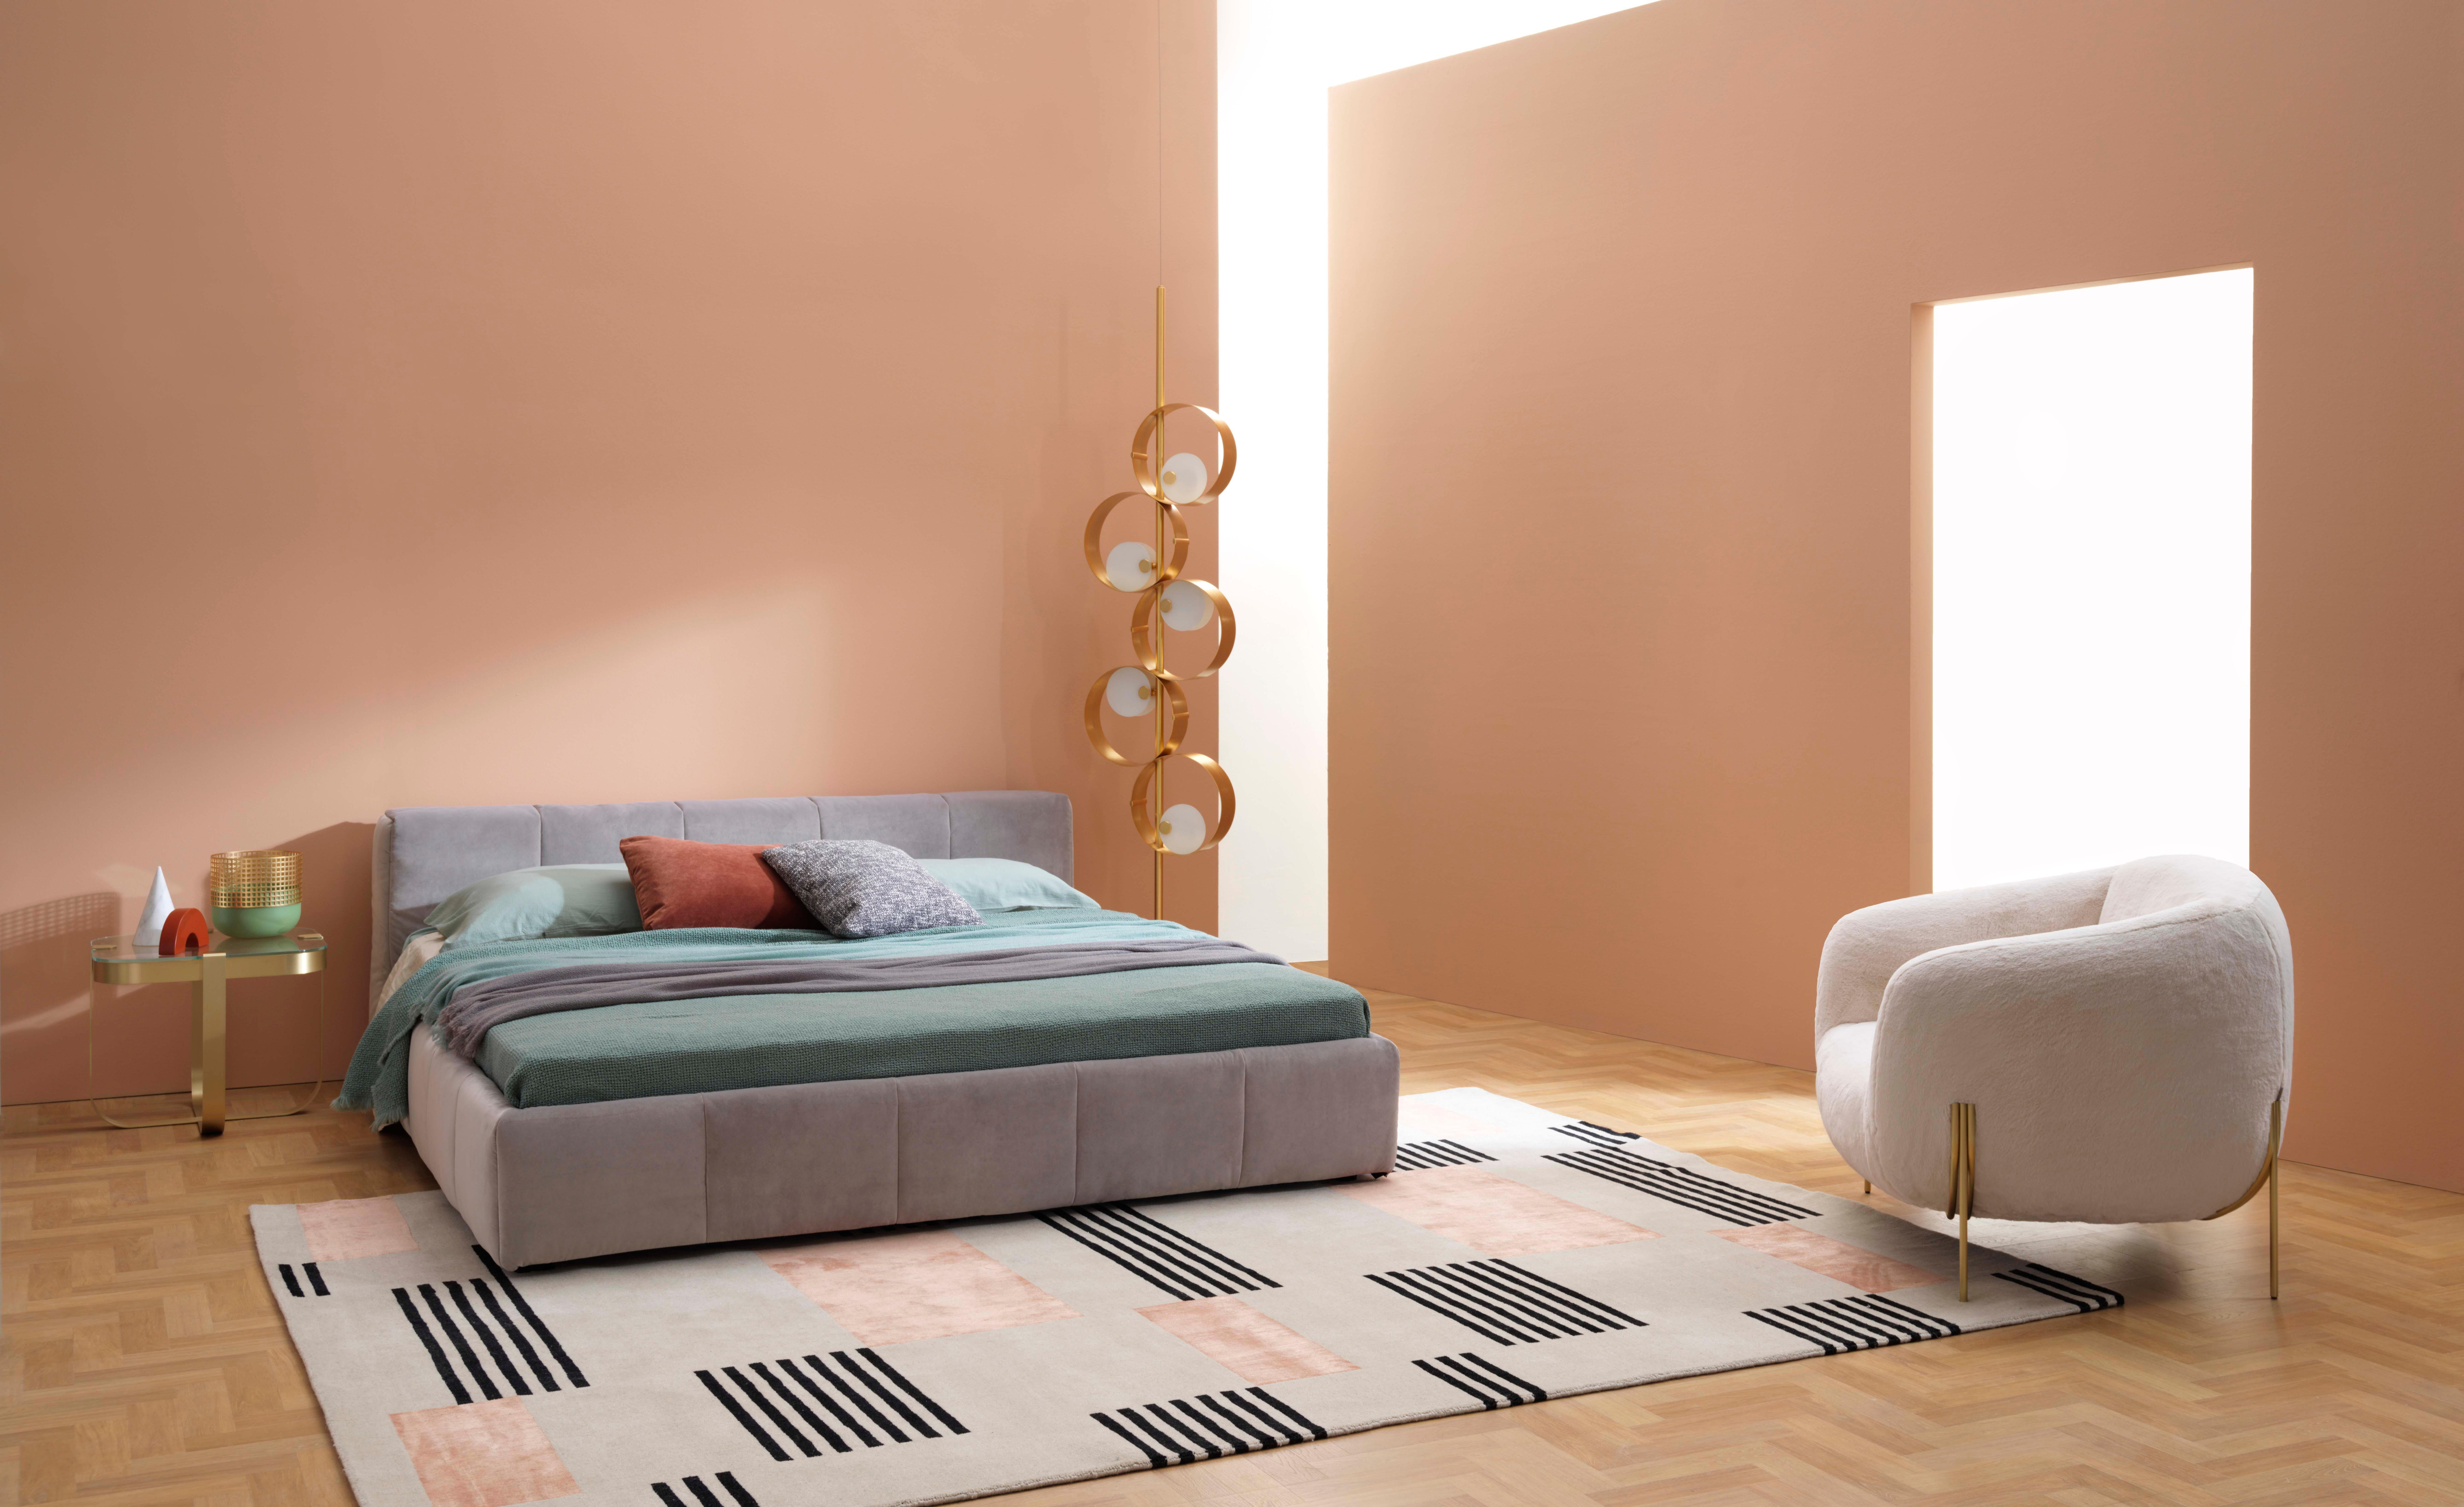 The pixel bed is soft in the entirety of its design. It offers a generous and comforting single volume thanks to the ample padding of the upholstered structure and rounded corners. The bed frame and the headboard are characterised by the quilted